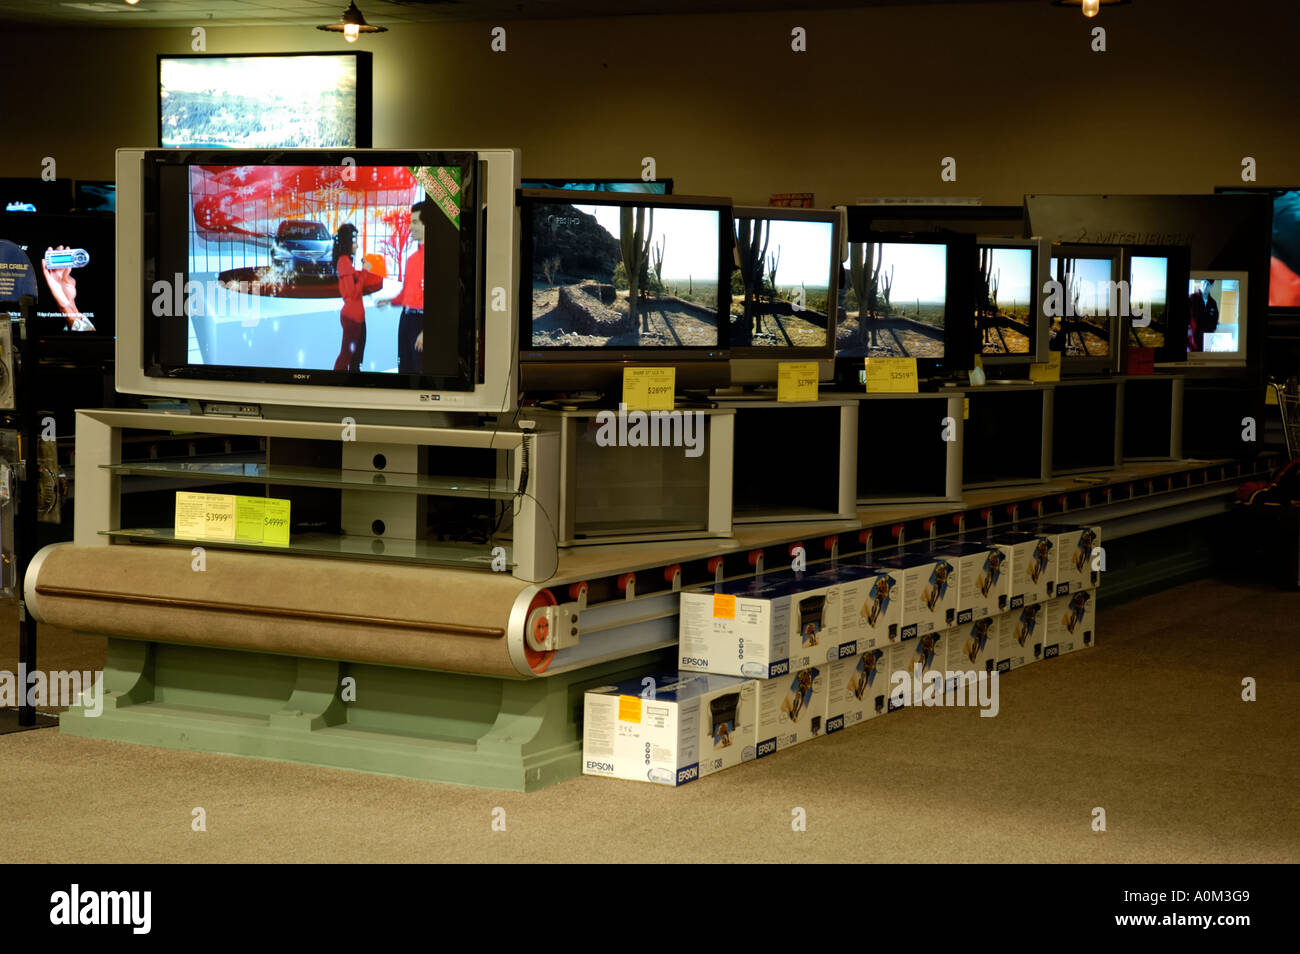 Television sets lined up in display. Fry's electronics store CALIFORNIA Stock Photo